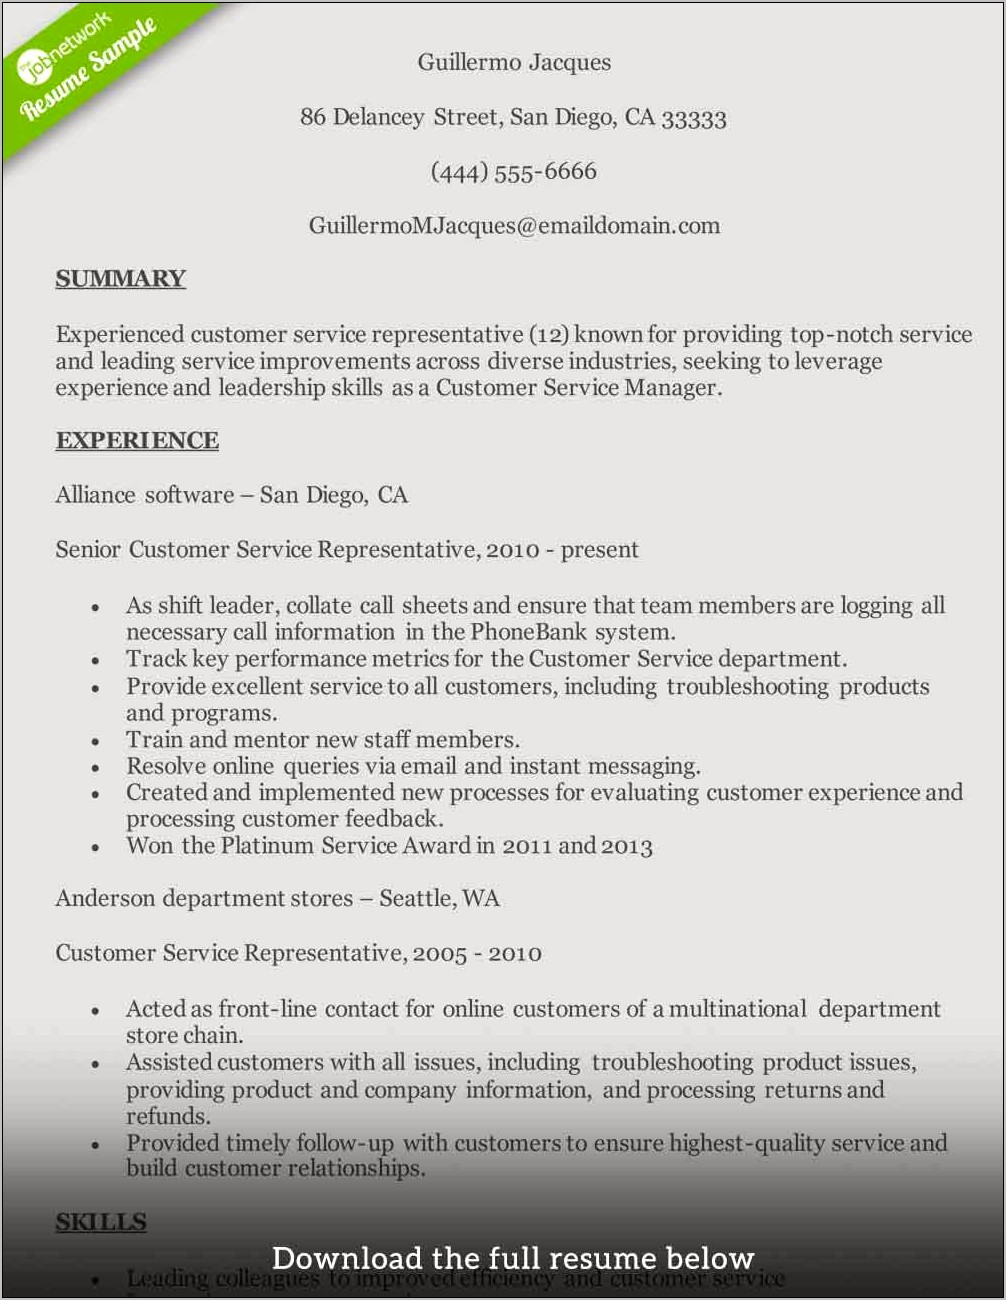 Customer Service Resume Out Of Work A While